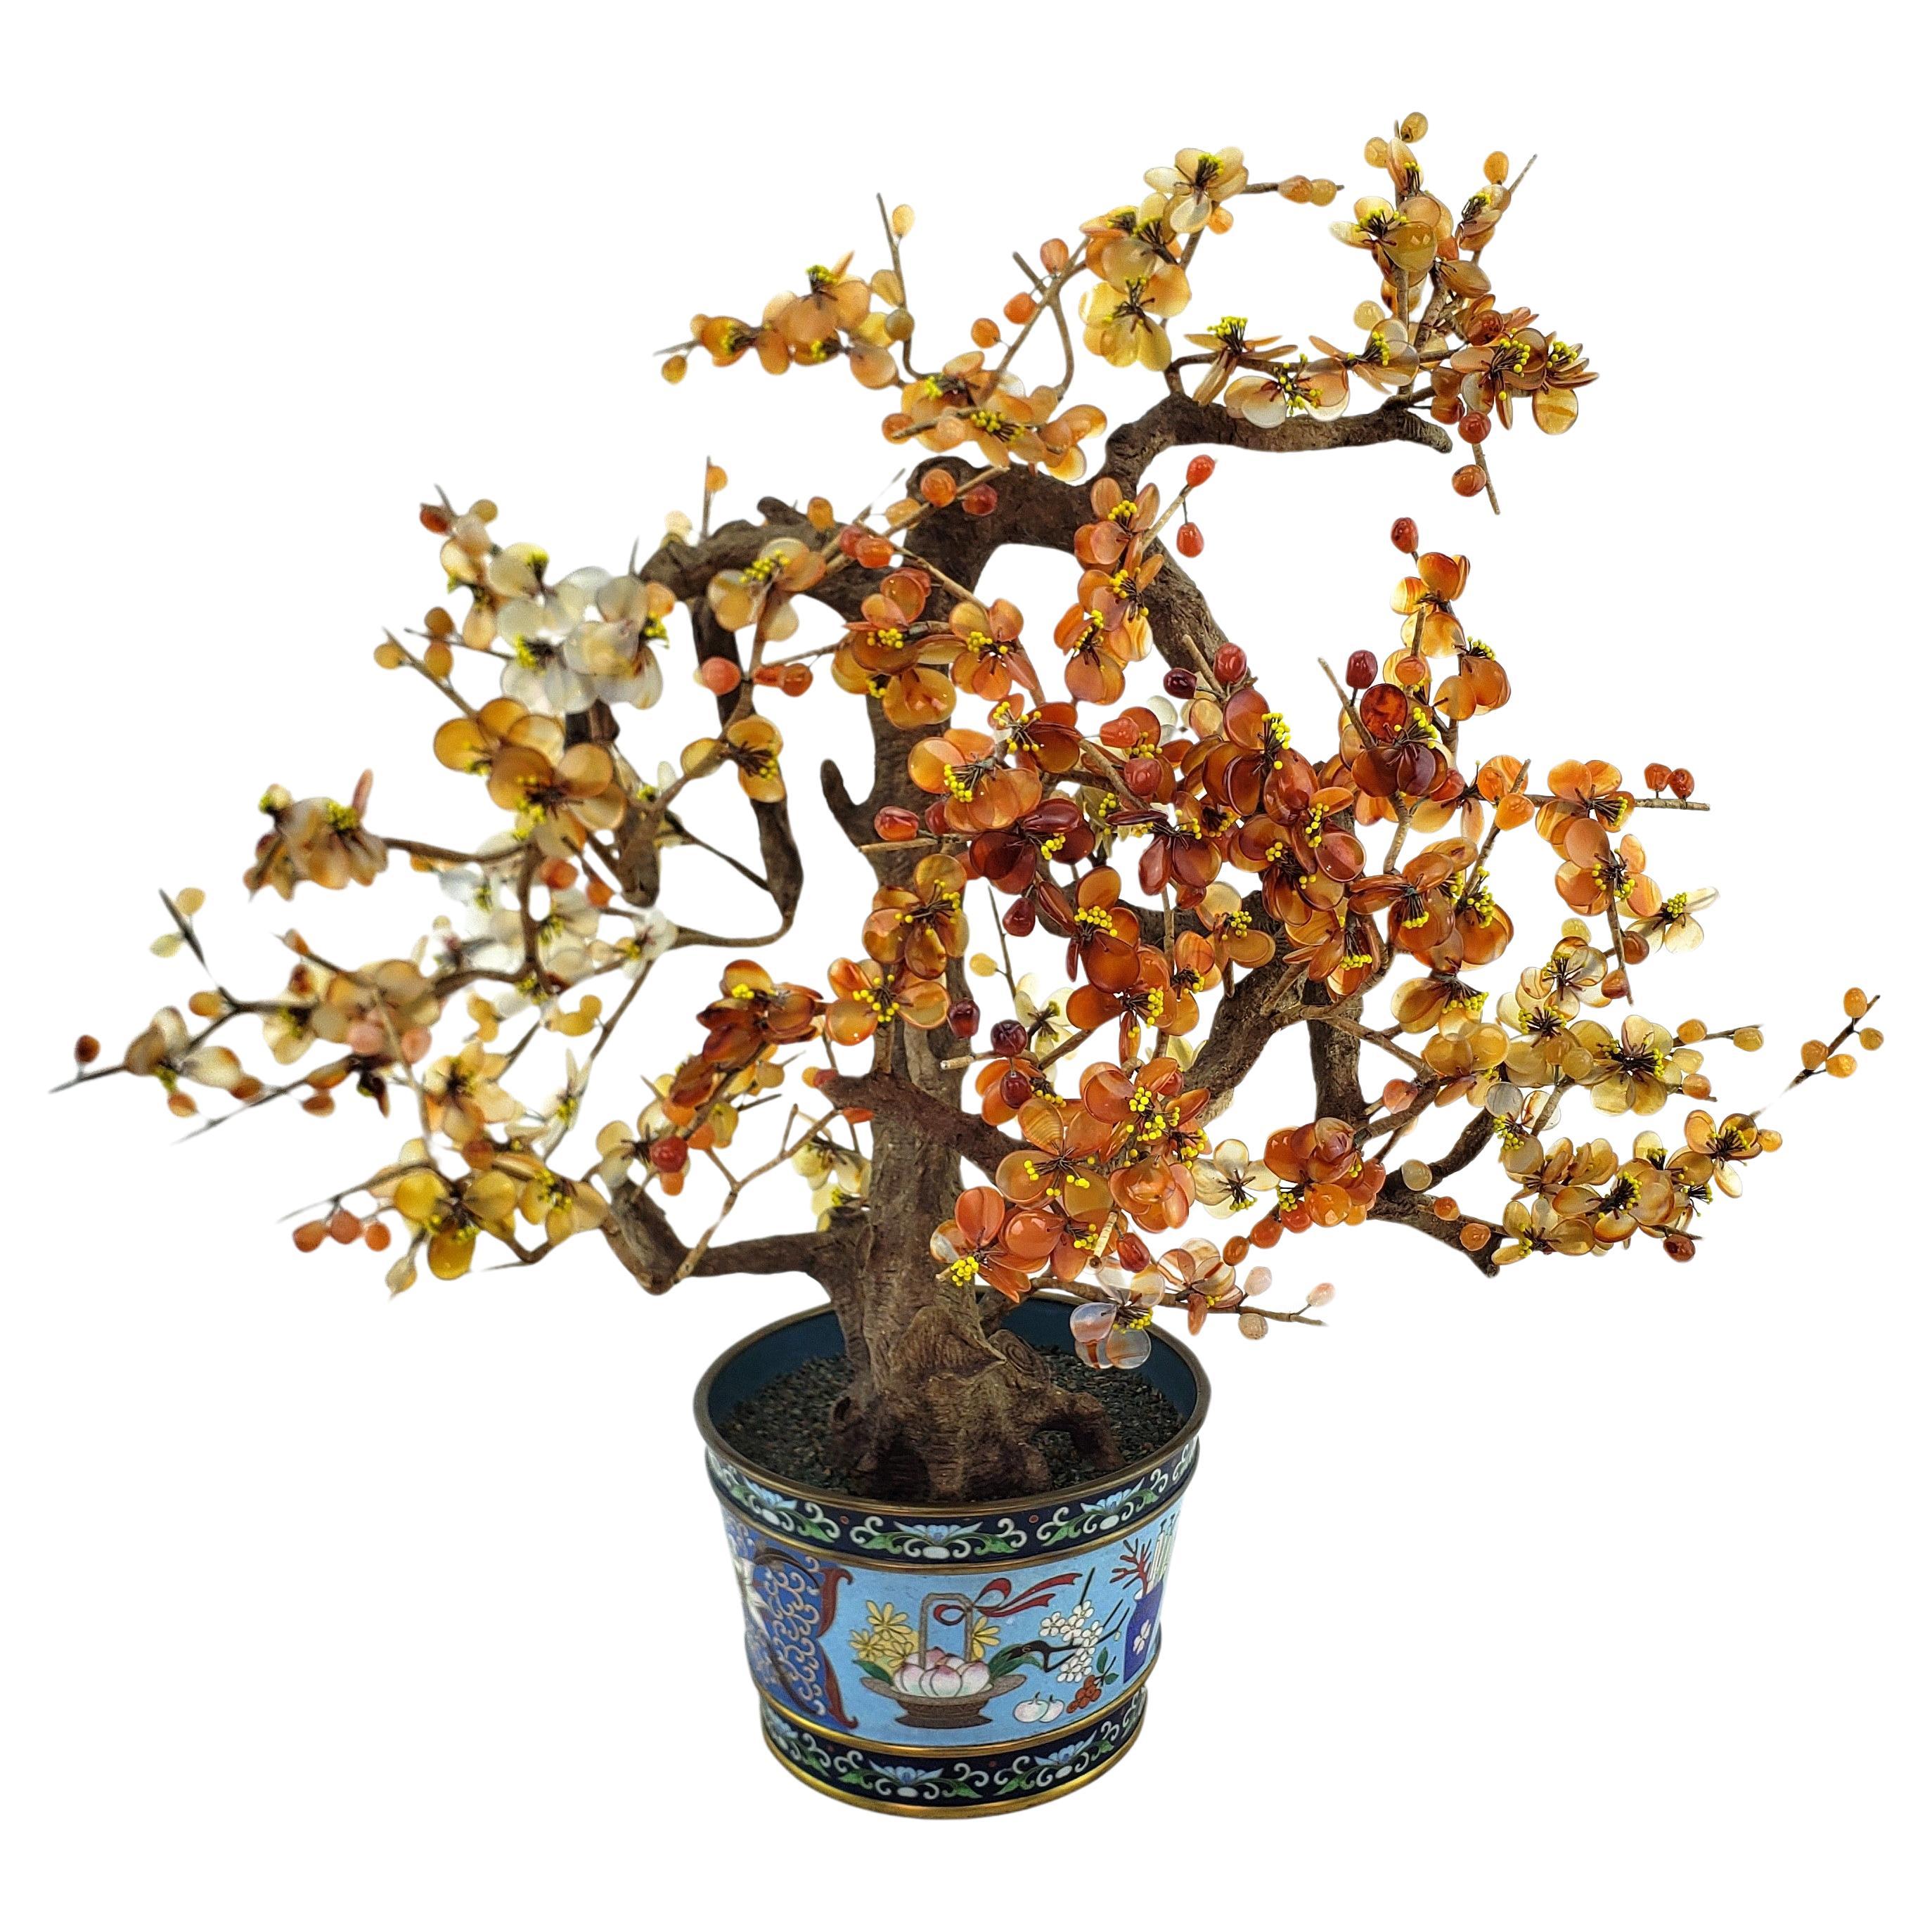 Antique Chinese Bonzai Styled Flowering Fruit Tree Sculpture with Cloisonne Pot For Sale